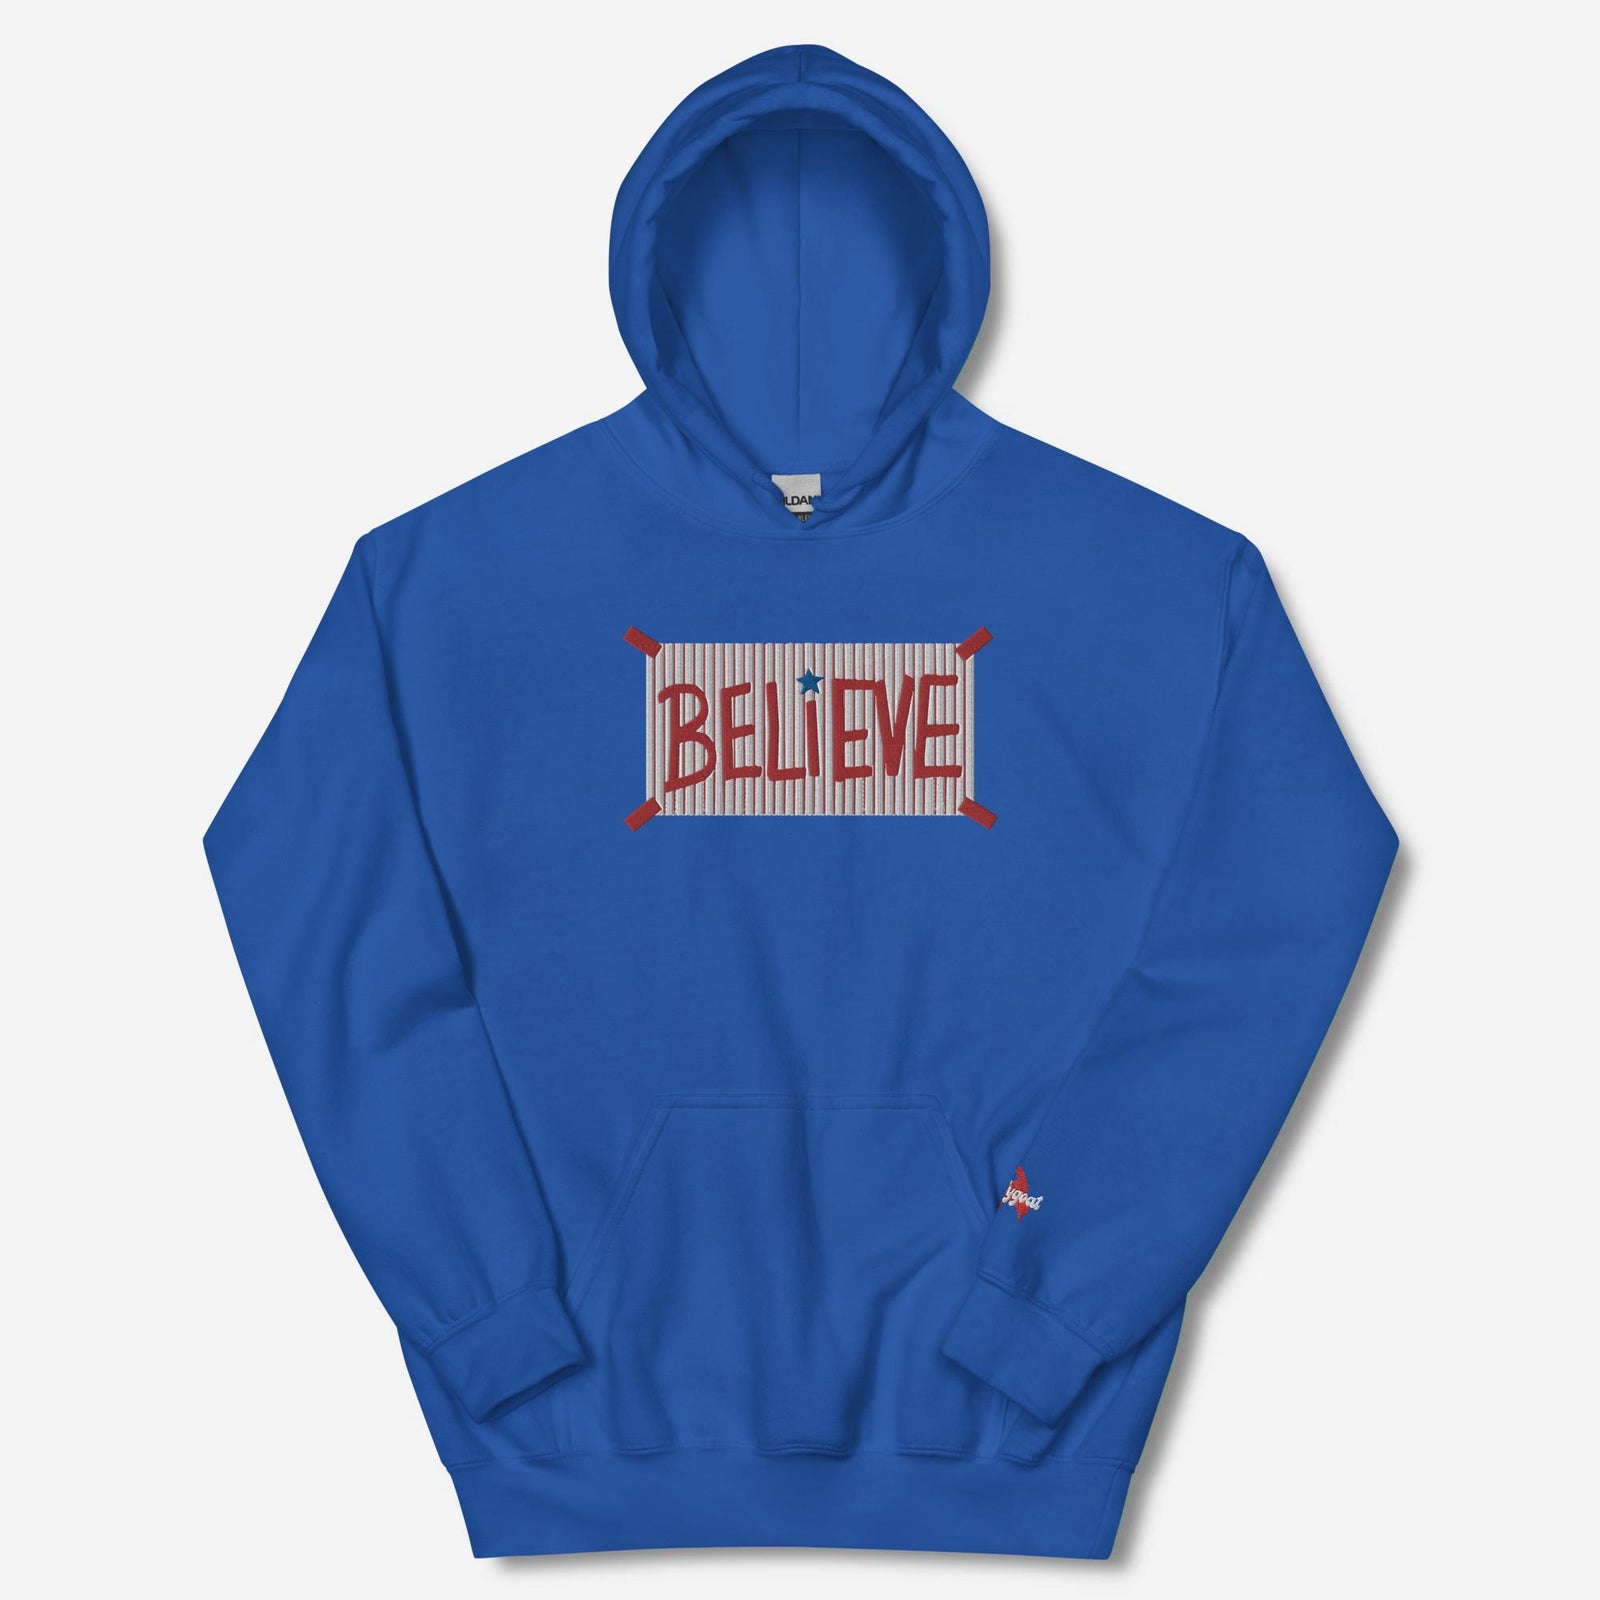 "Believe" Embroidered Hoodie